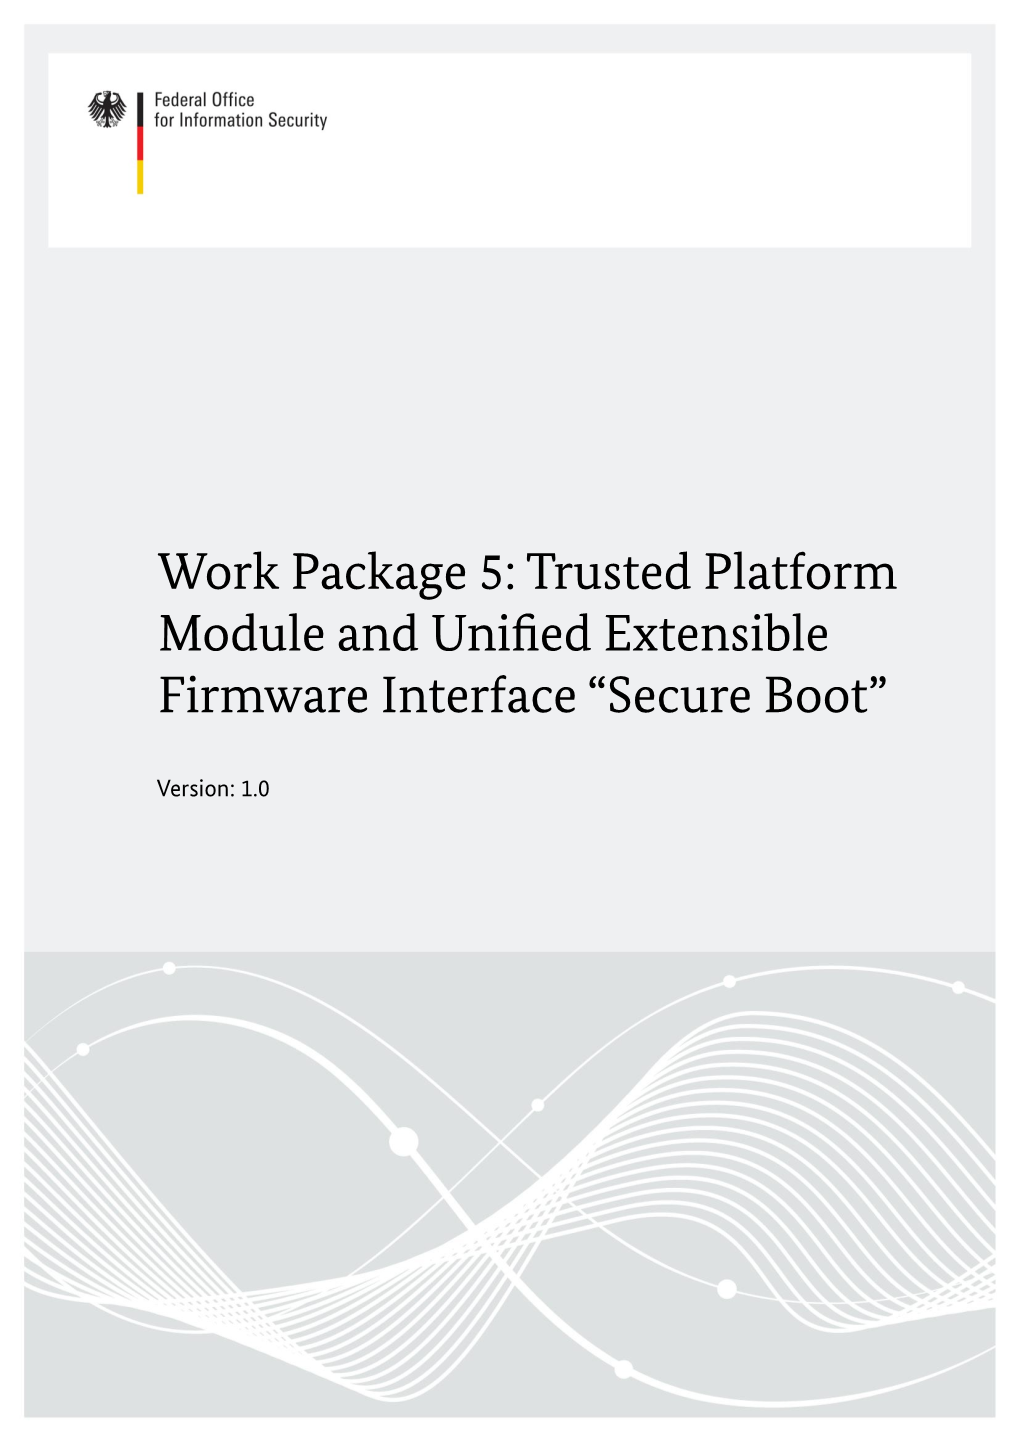 Work Package 5: TPM and "UEFI Secure Boot"